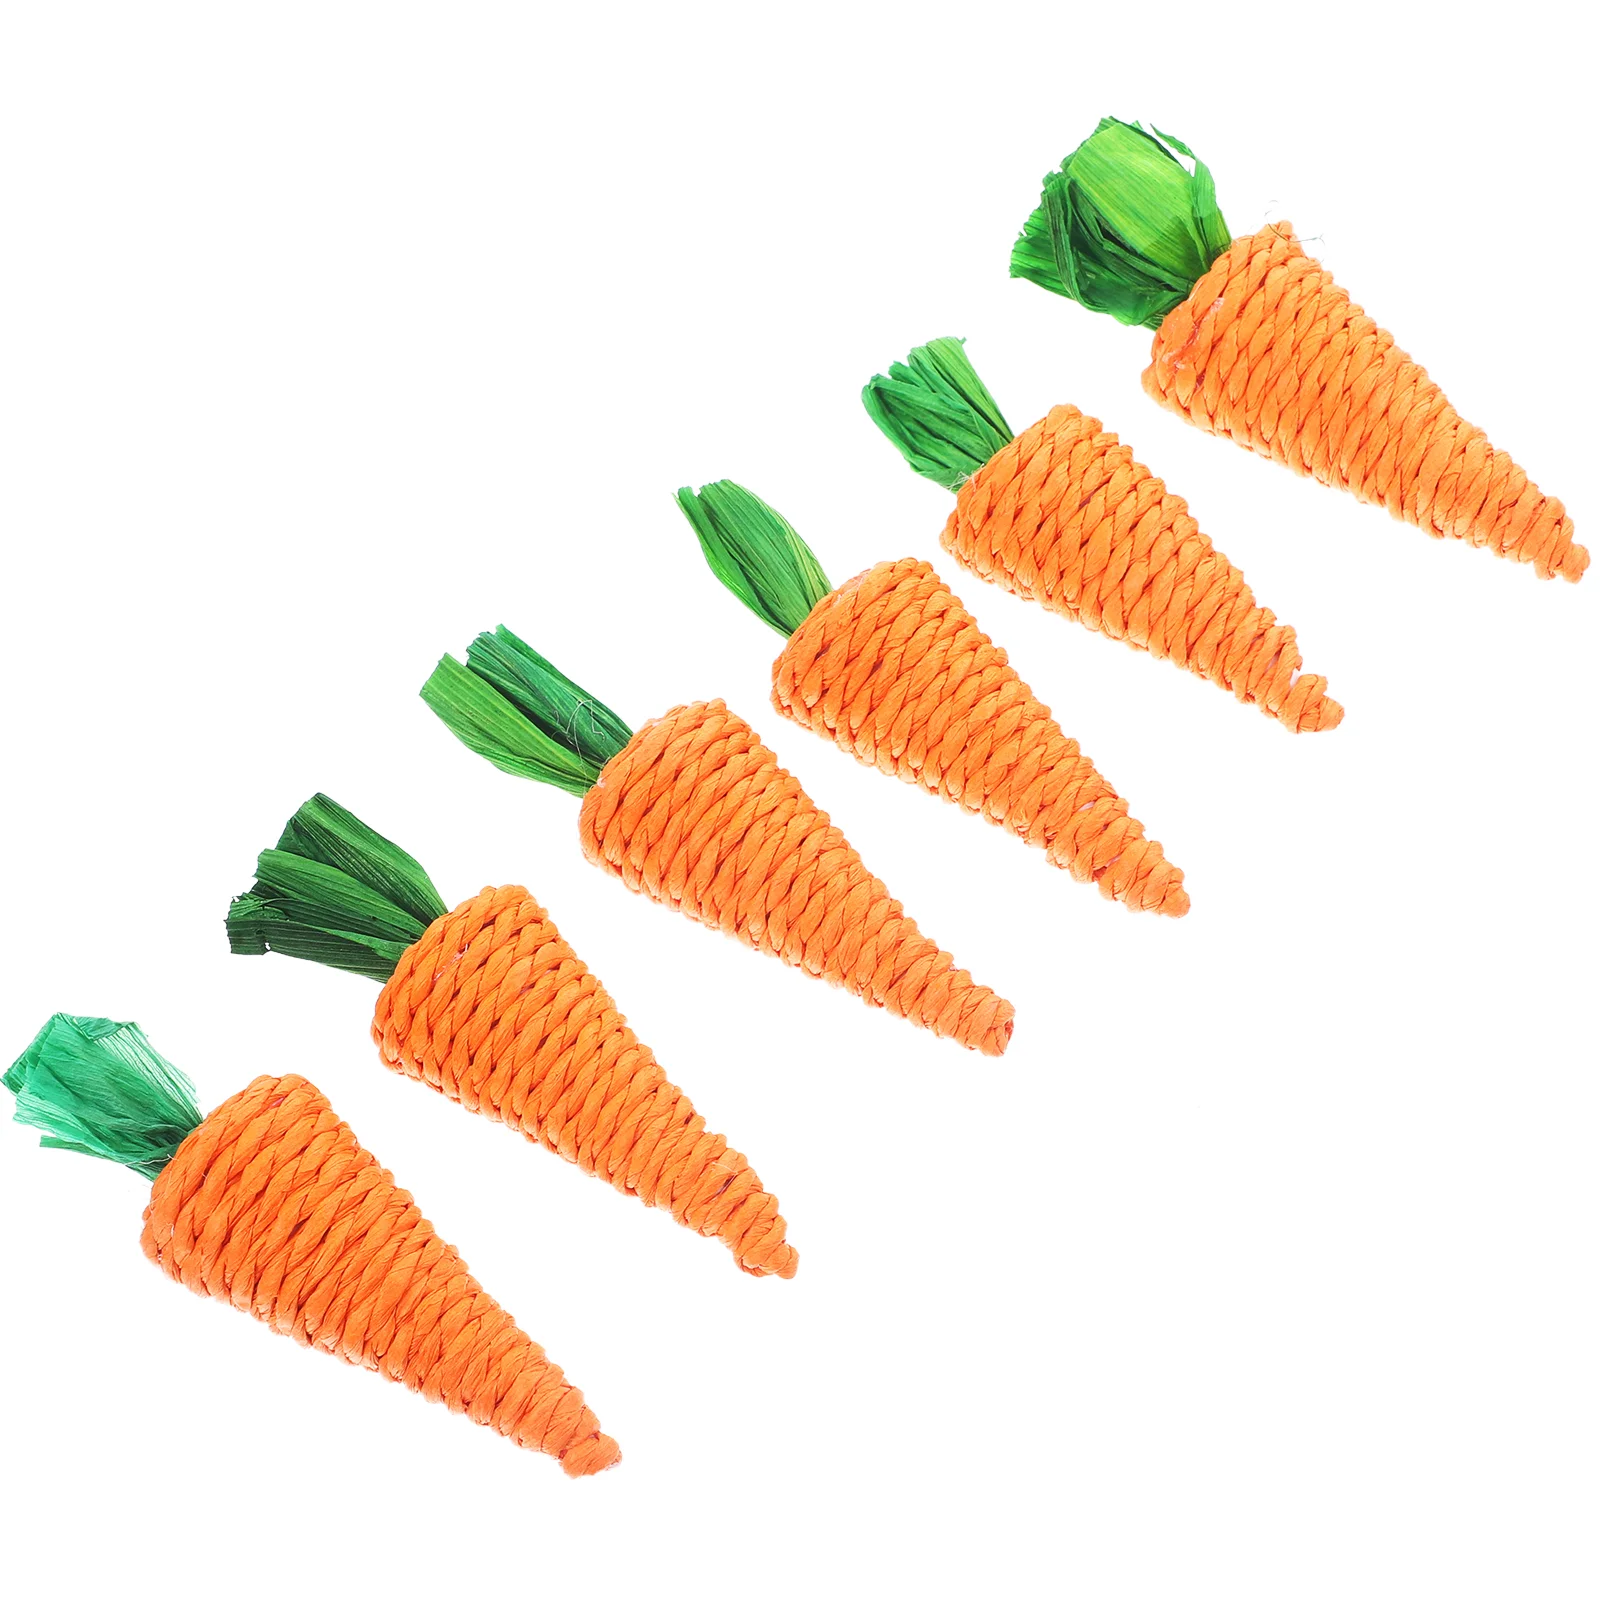 

Hamster Toys Chew Toy Rabbit Molar Chewing Teeth Accessories Bunny Cage Treats Care Carrot Plaything Dwarf Easter Carrots Guinea